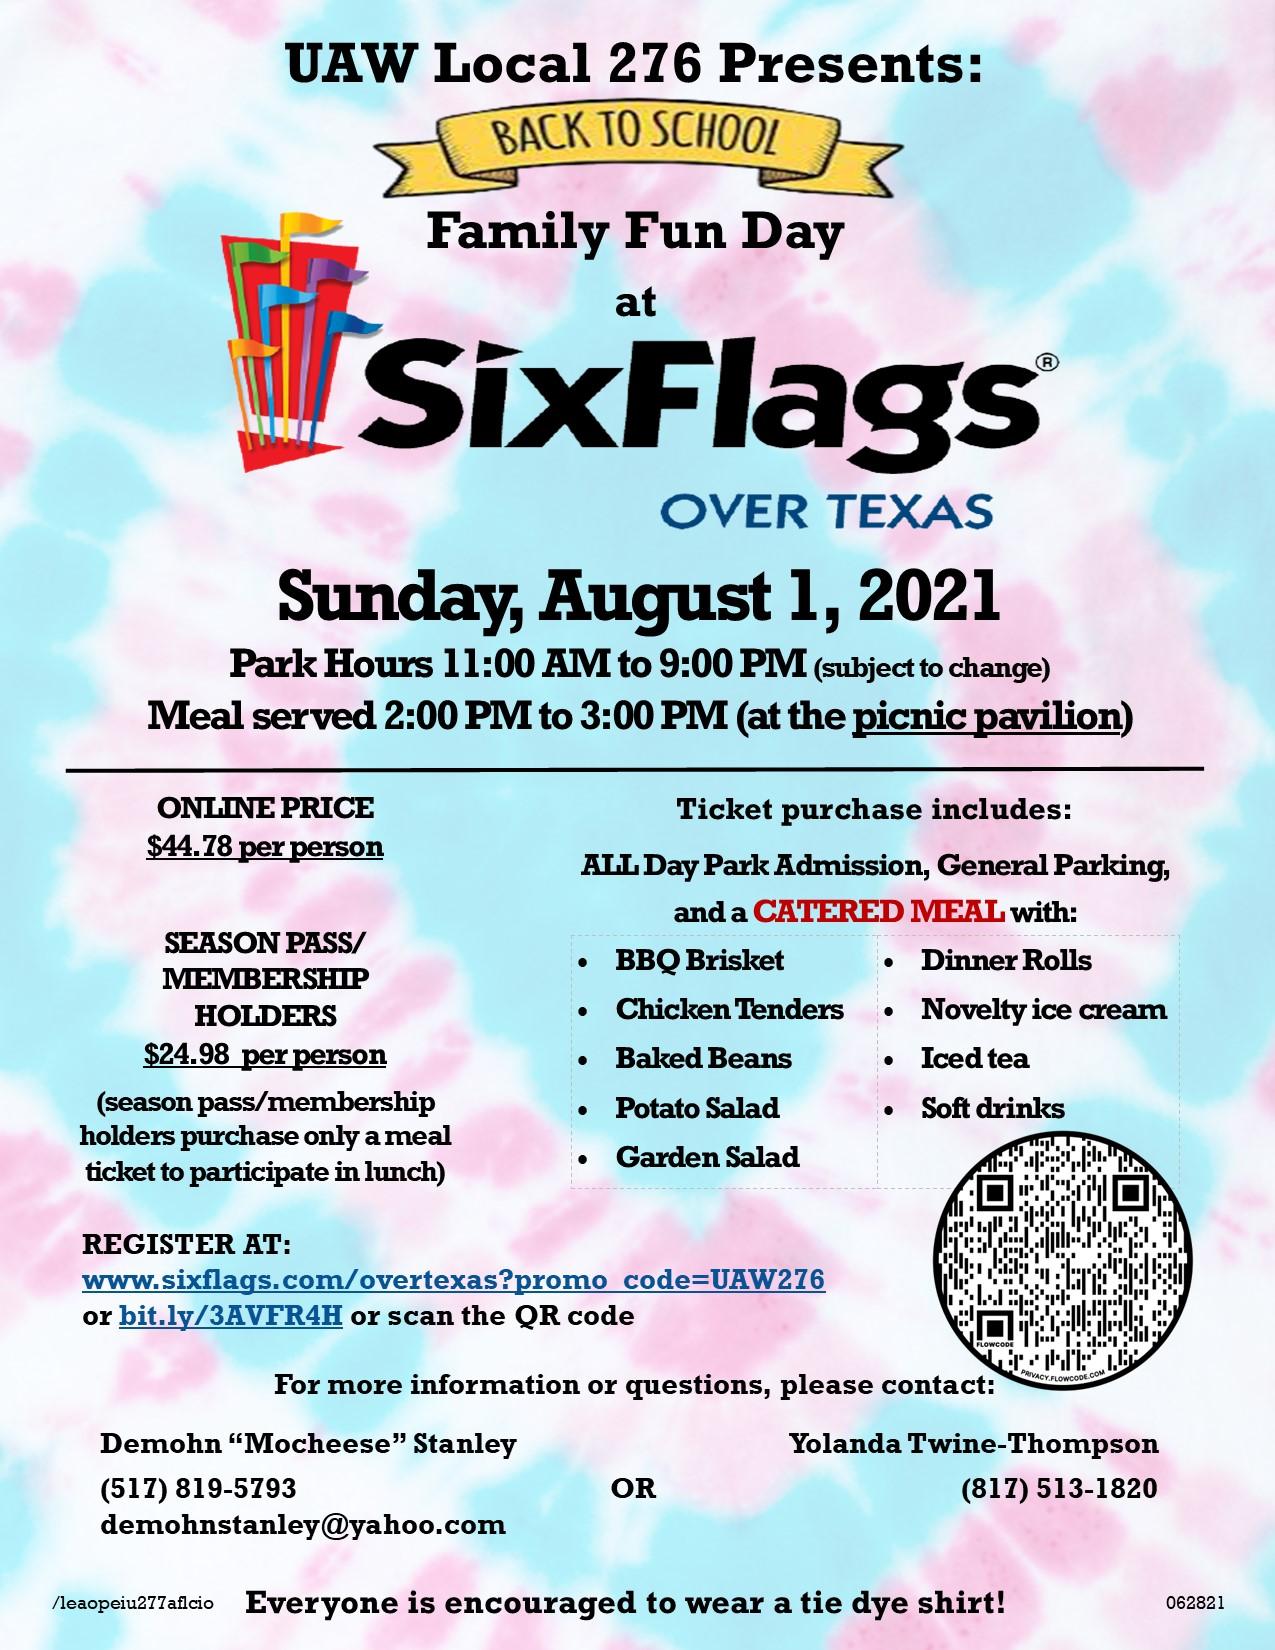 Family Fun Day at Six Flags UAW Local 276